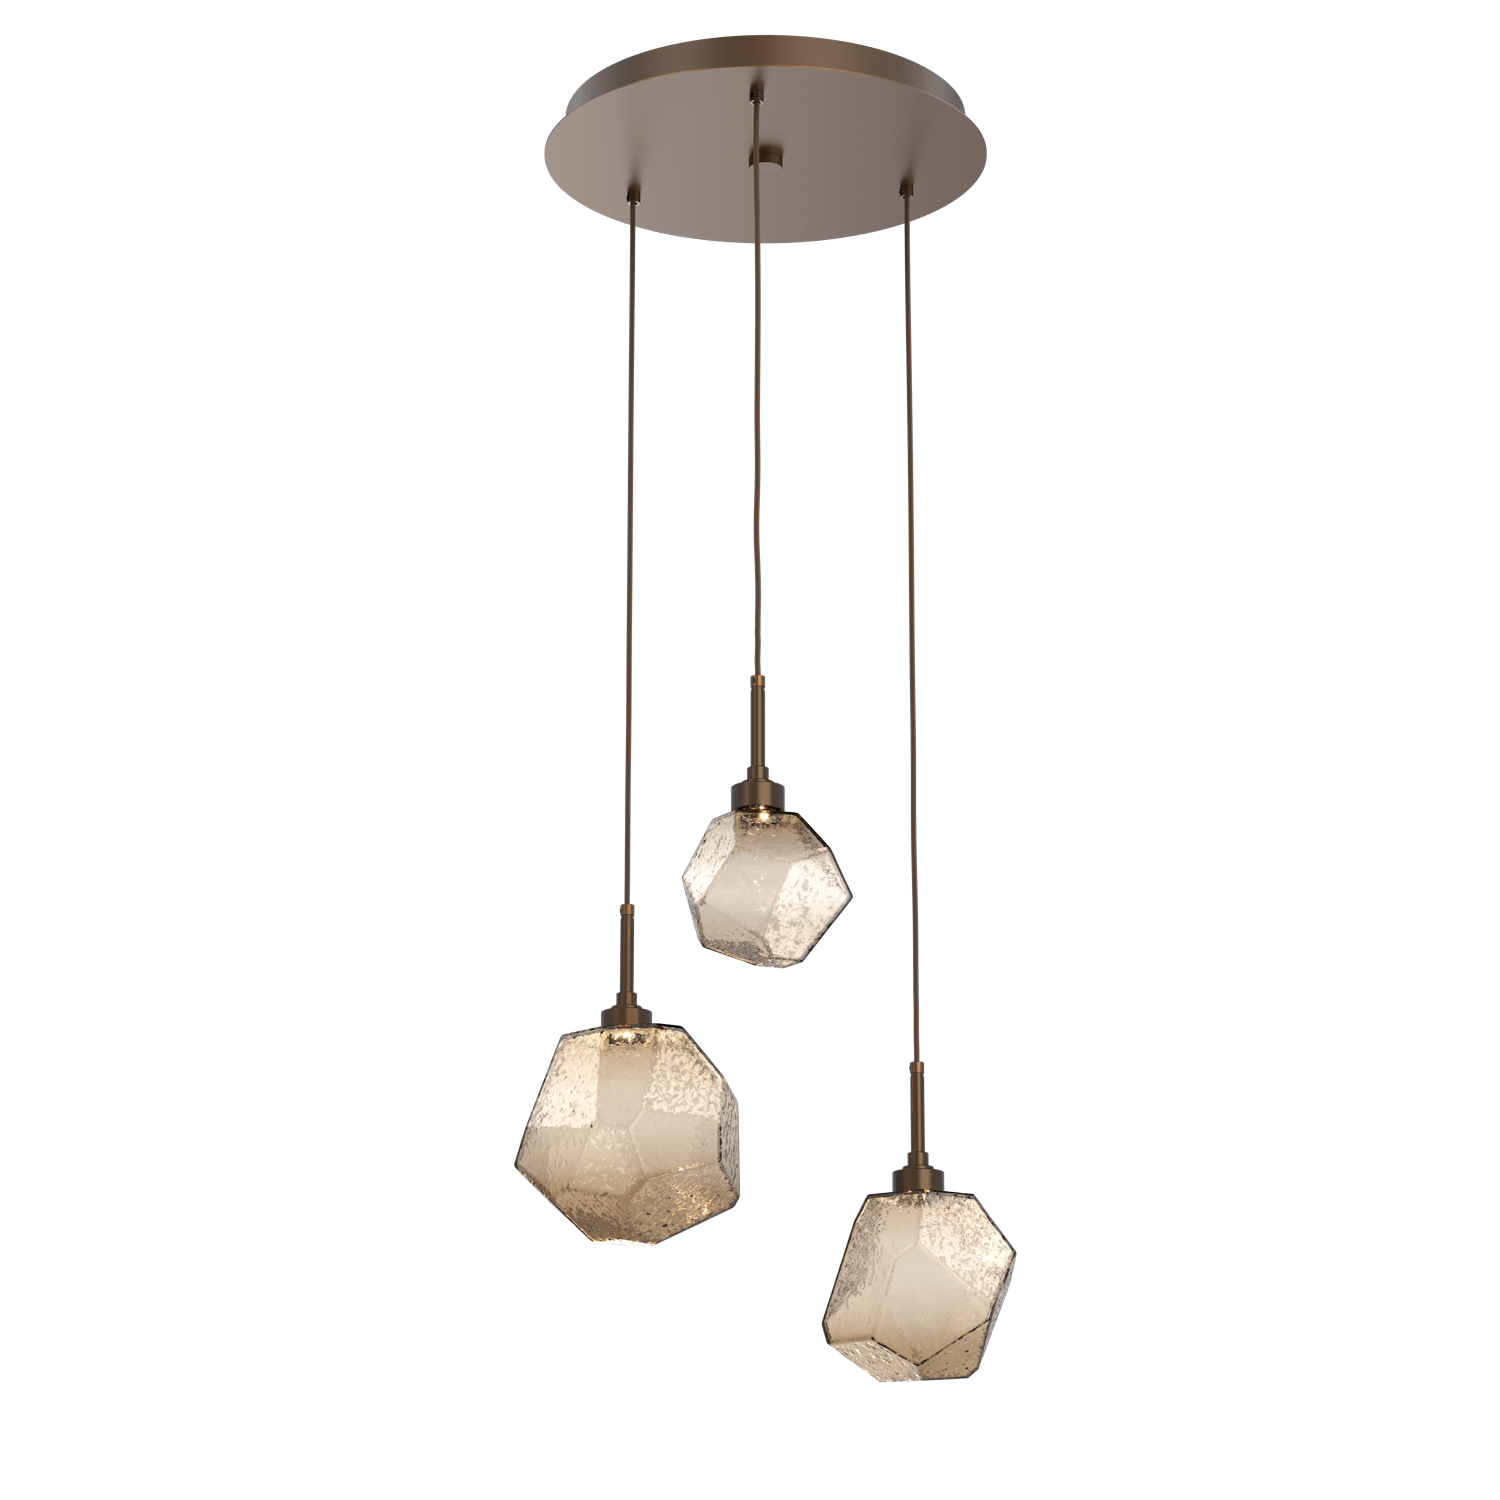 CHB0039-03-FB-B-Hammerton-Studio-Gem-3-light-round-pendant-chandelier-with-flat-bronze-finish-and-bronze-blown-glass-shades-and-LED-lamping